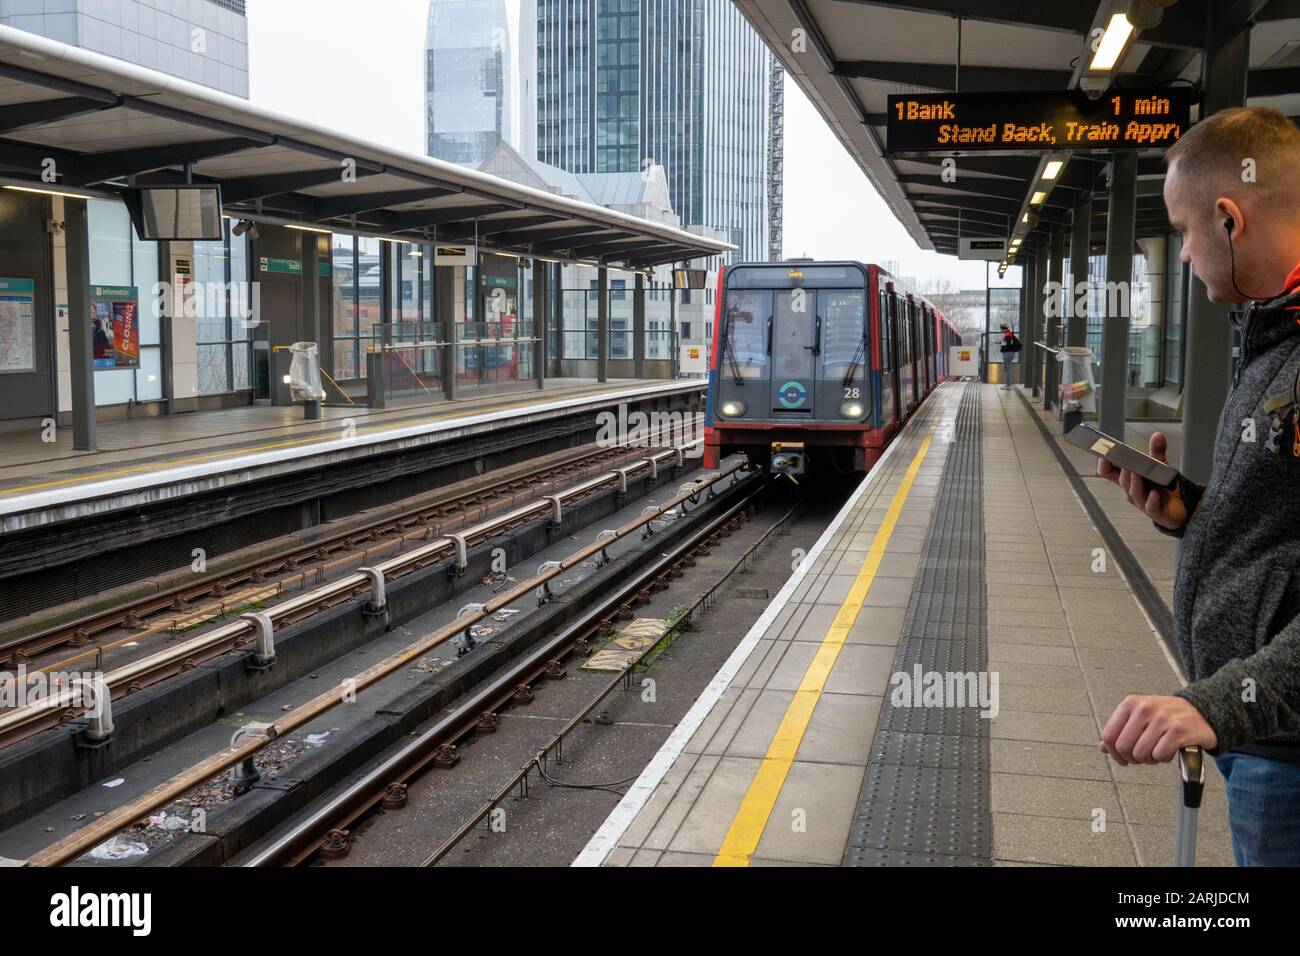 Train arriving at  South Quay, London Docklands Light Railway Stock Photo